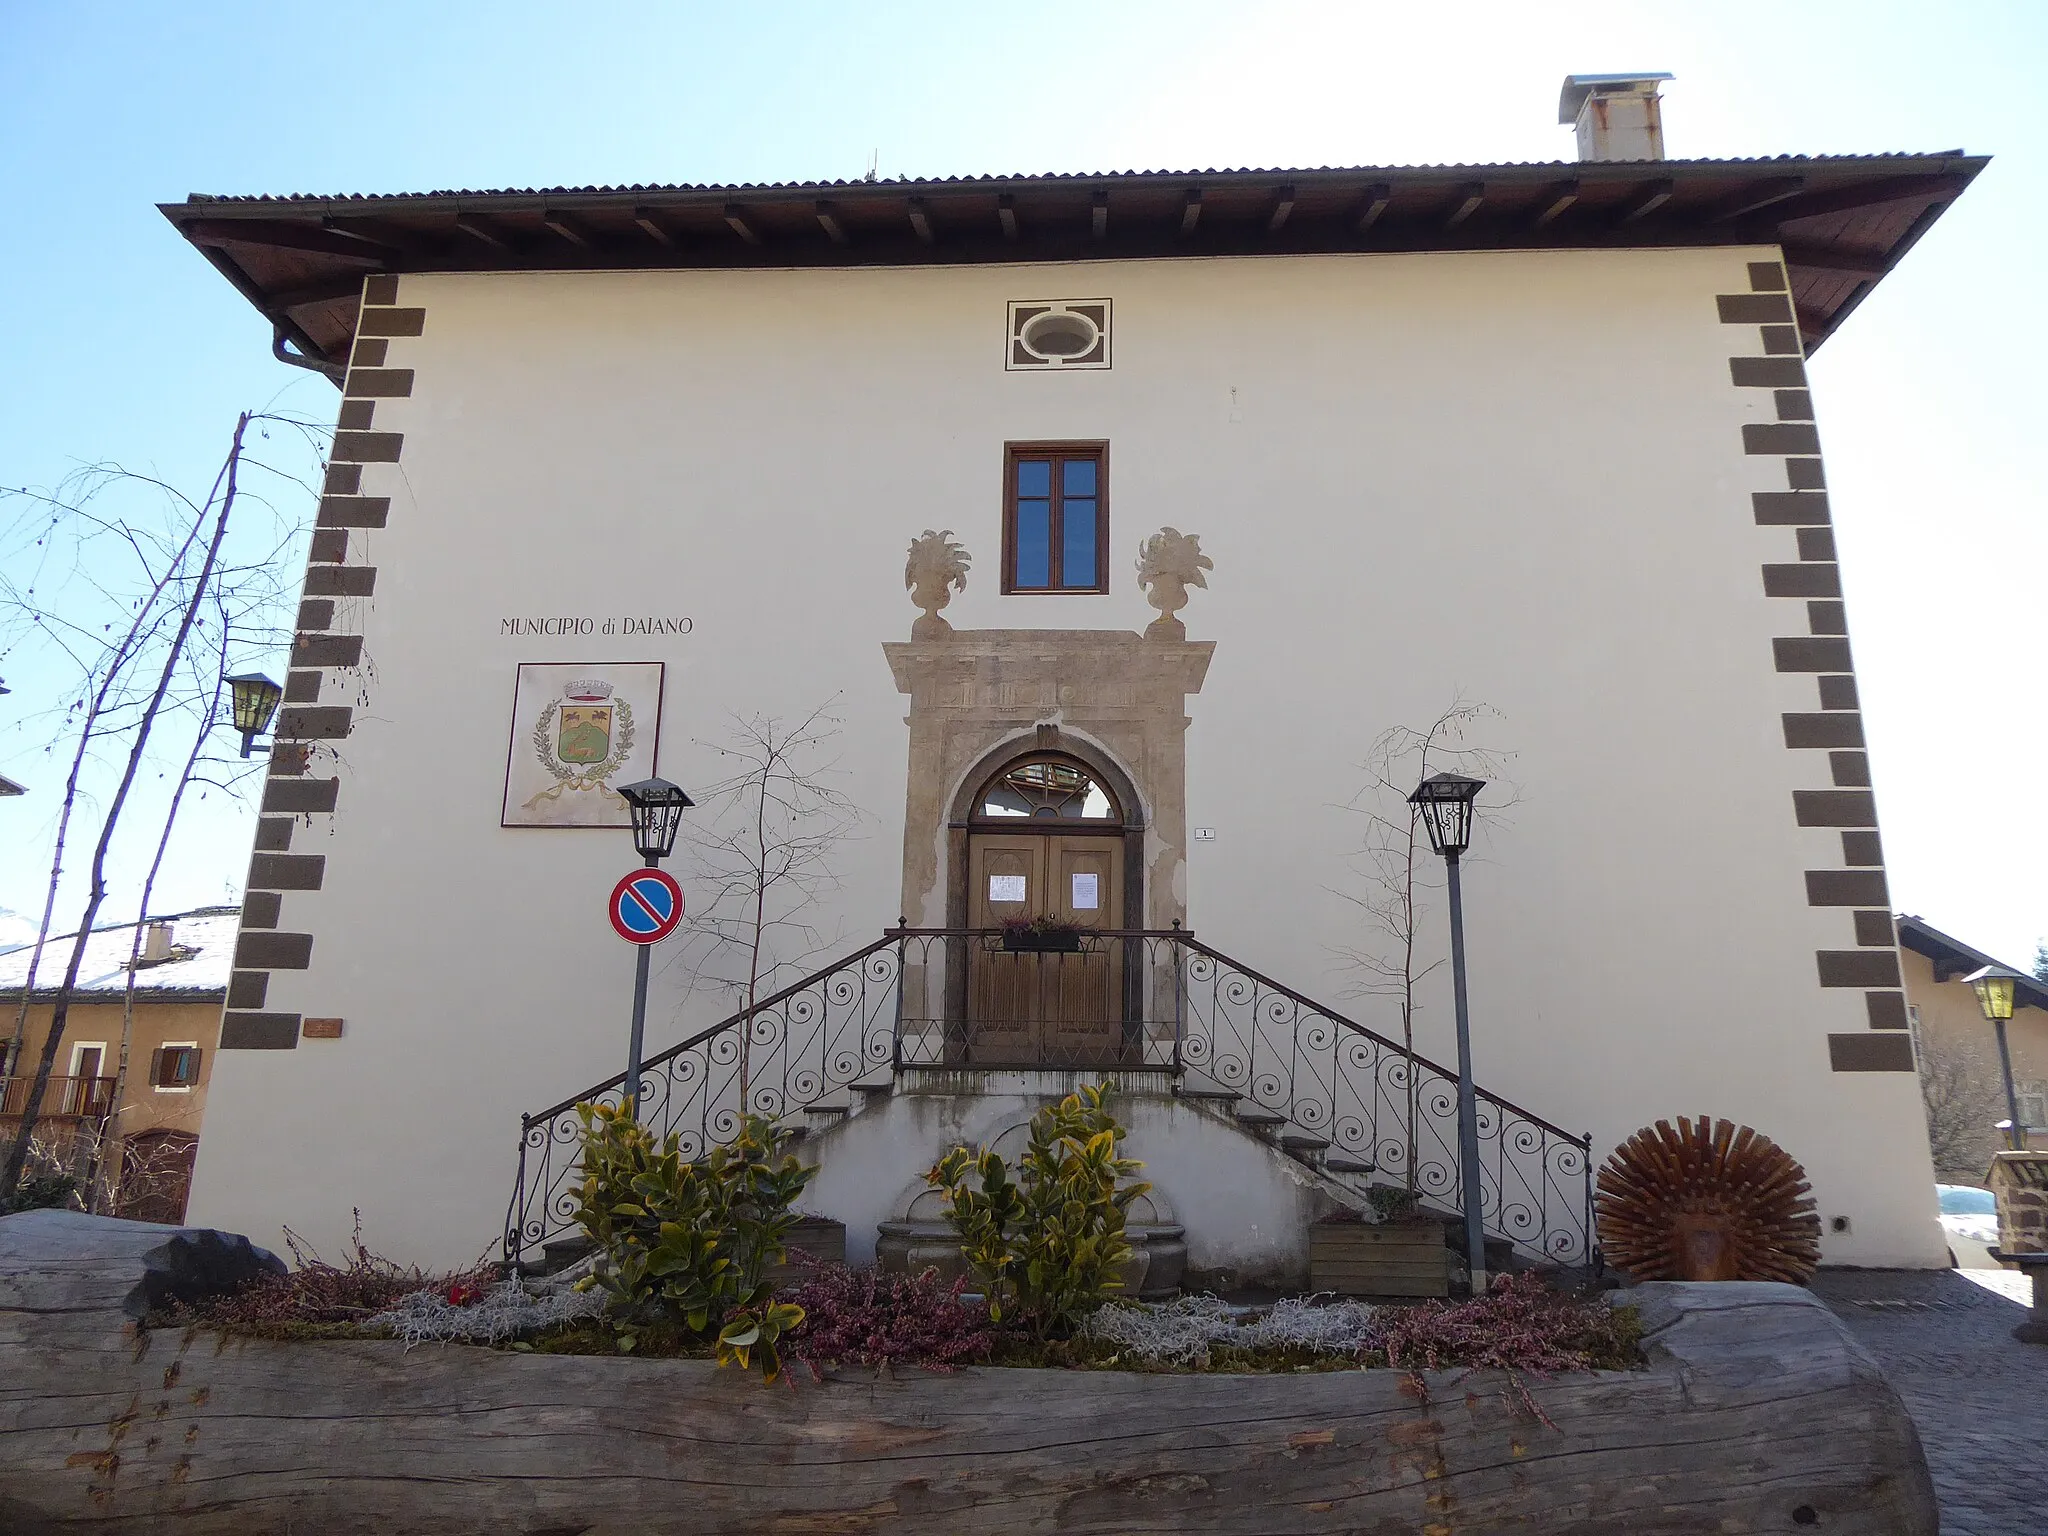 Photo showing: Daiano (Trentino, Italy) - Town hall